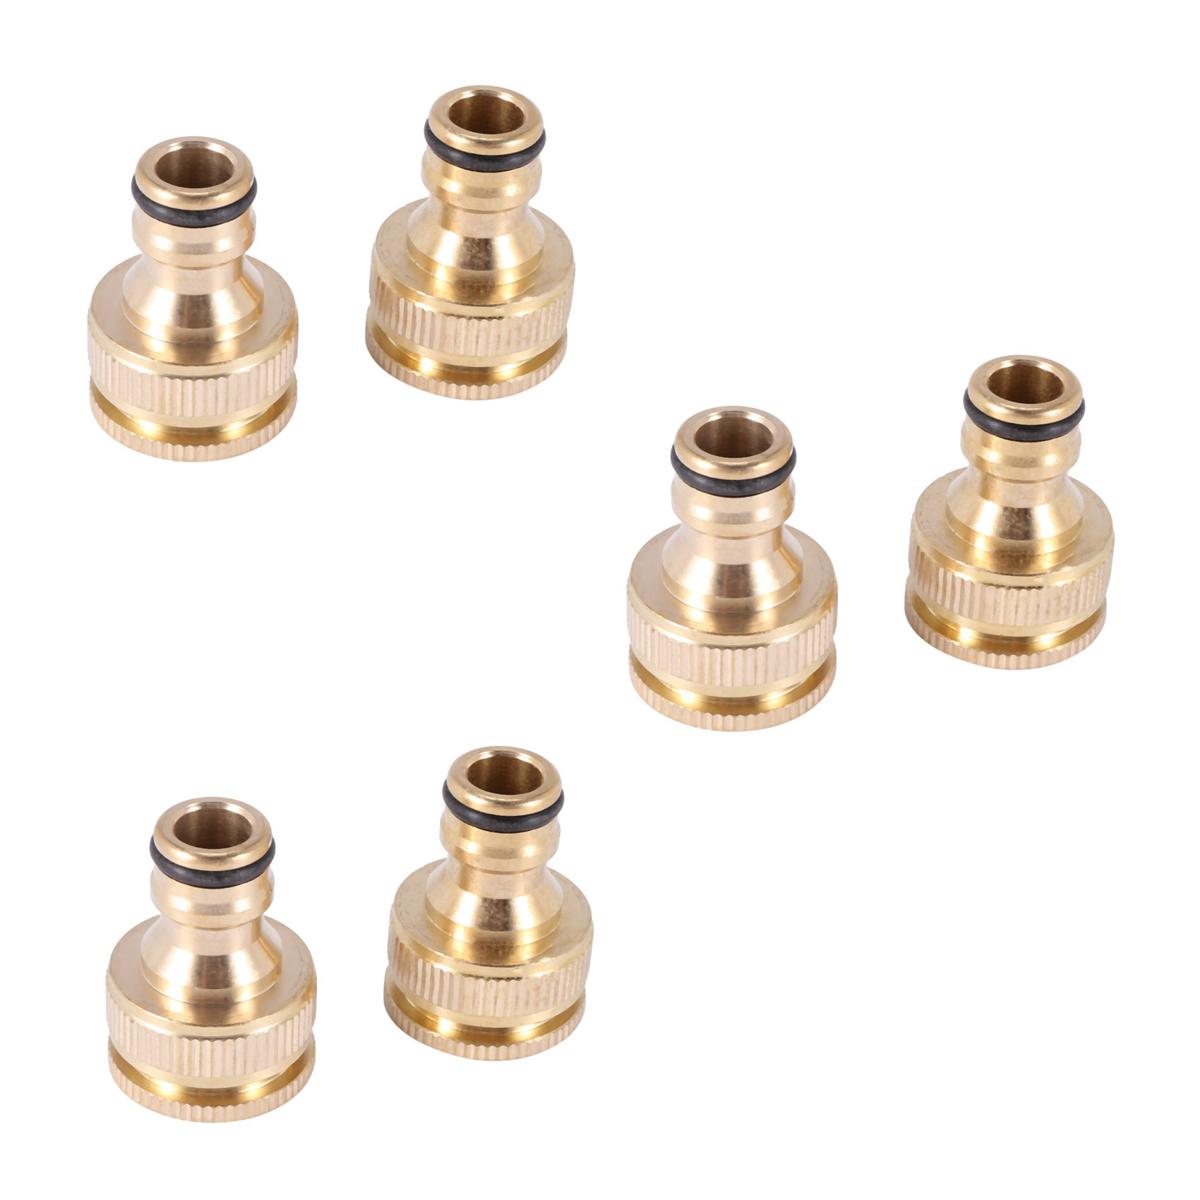 Pack Brass Garden Hose/Hosepipe Tap Connector 1/2 Inch and 3/4 Inch  2-In-1 Female Threaded Faucet Adapter